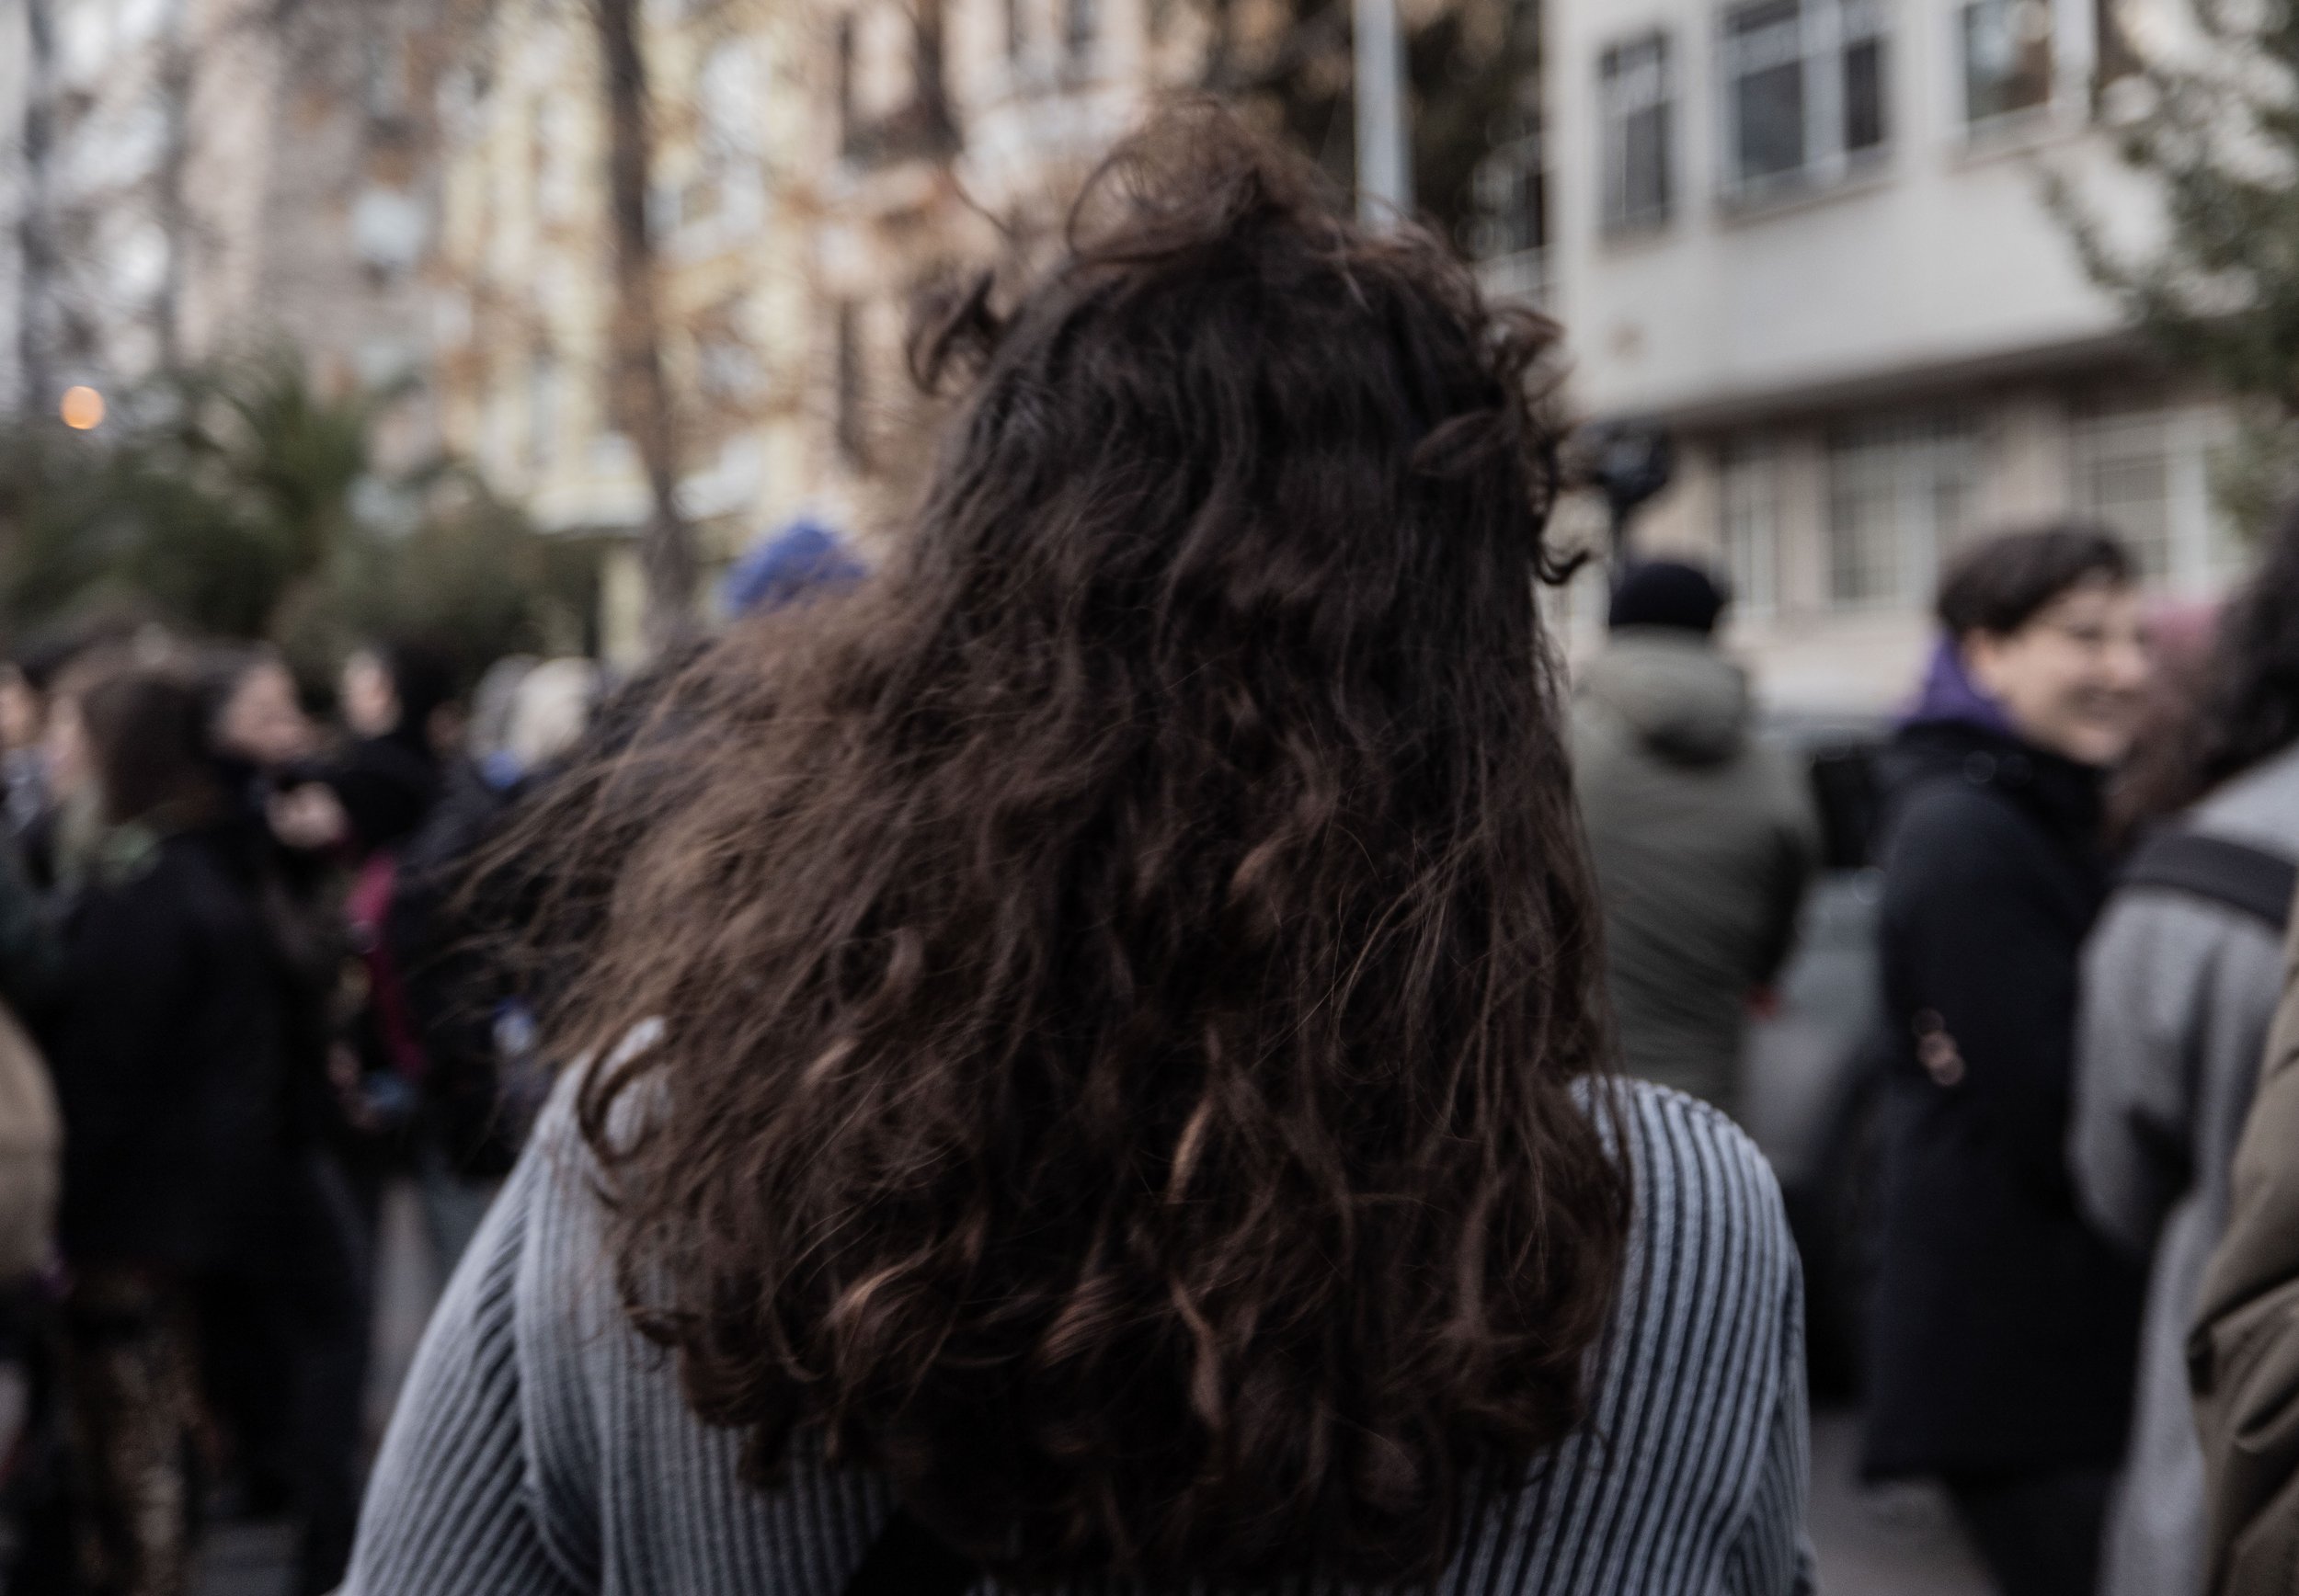  Zeynep walks through a crowd of women  near Takysm square prior to the official gathering of women protesting the Turkish government on International Women’s Day. 